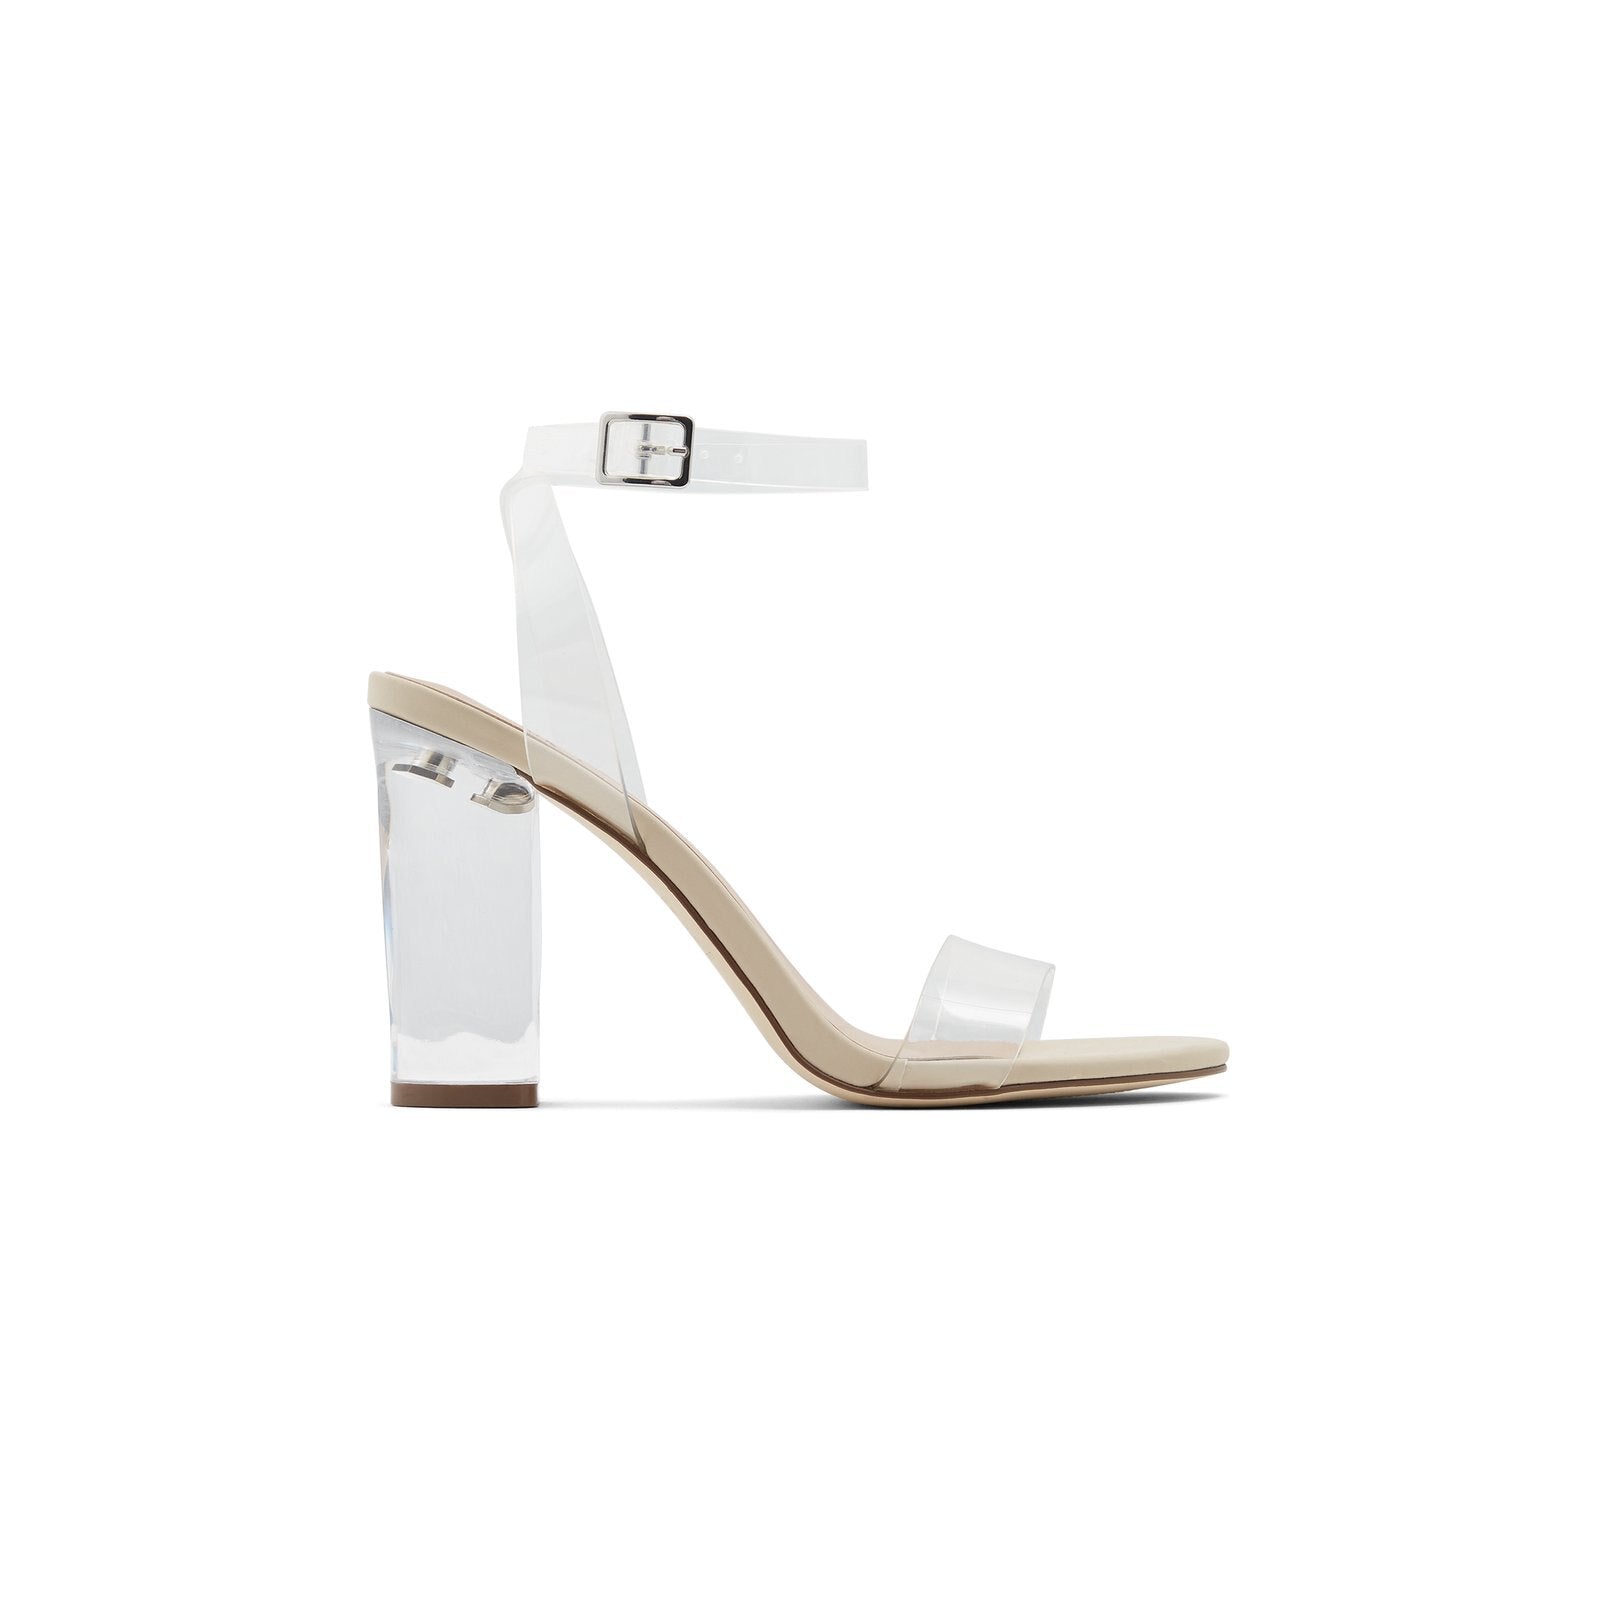 Carlyy / Heeled Sandals Women Shoes - CLEAR - CALL IT SPRING KSA